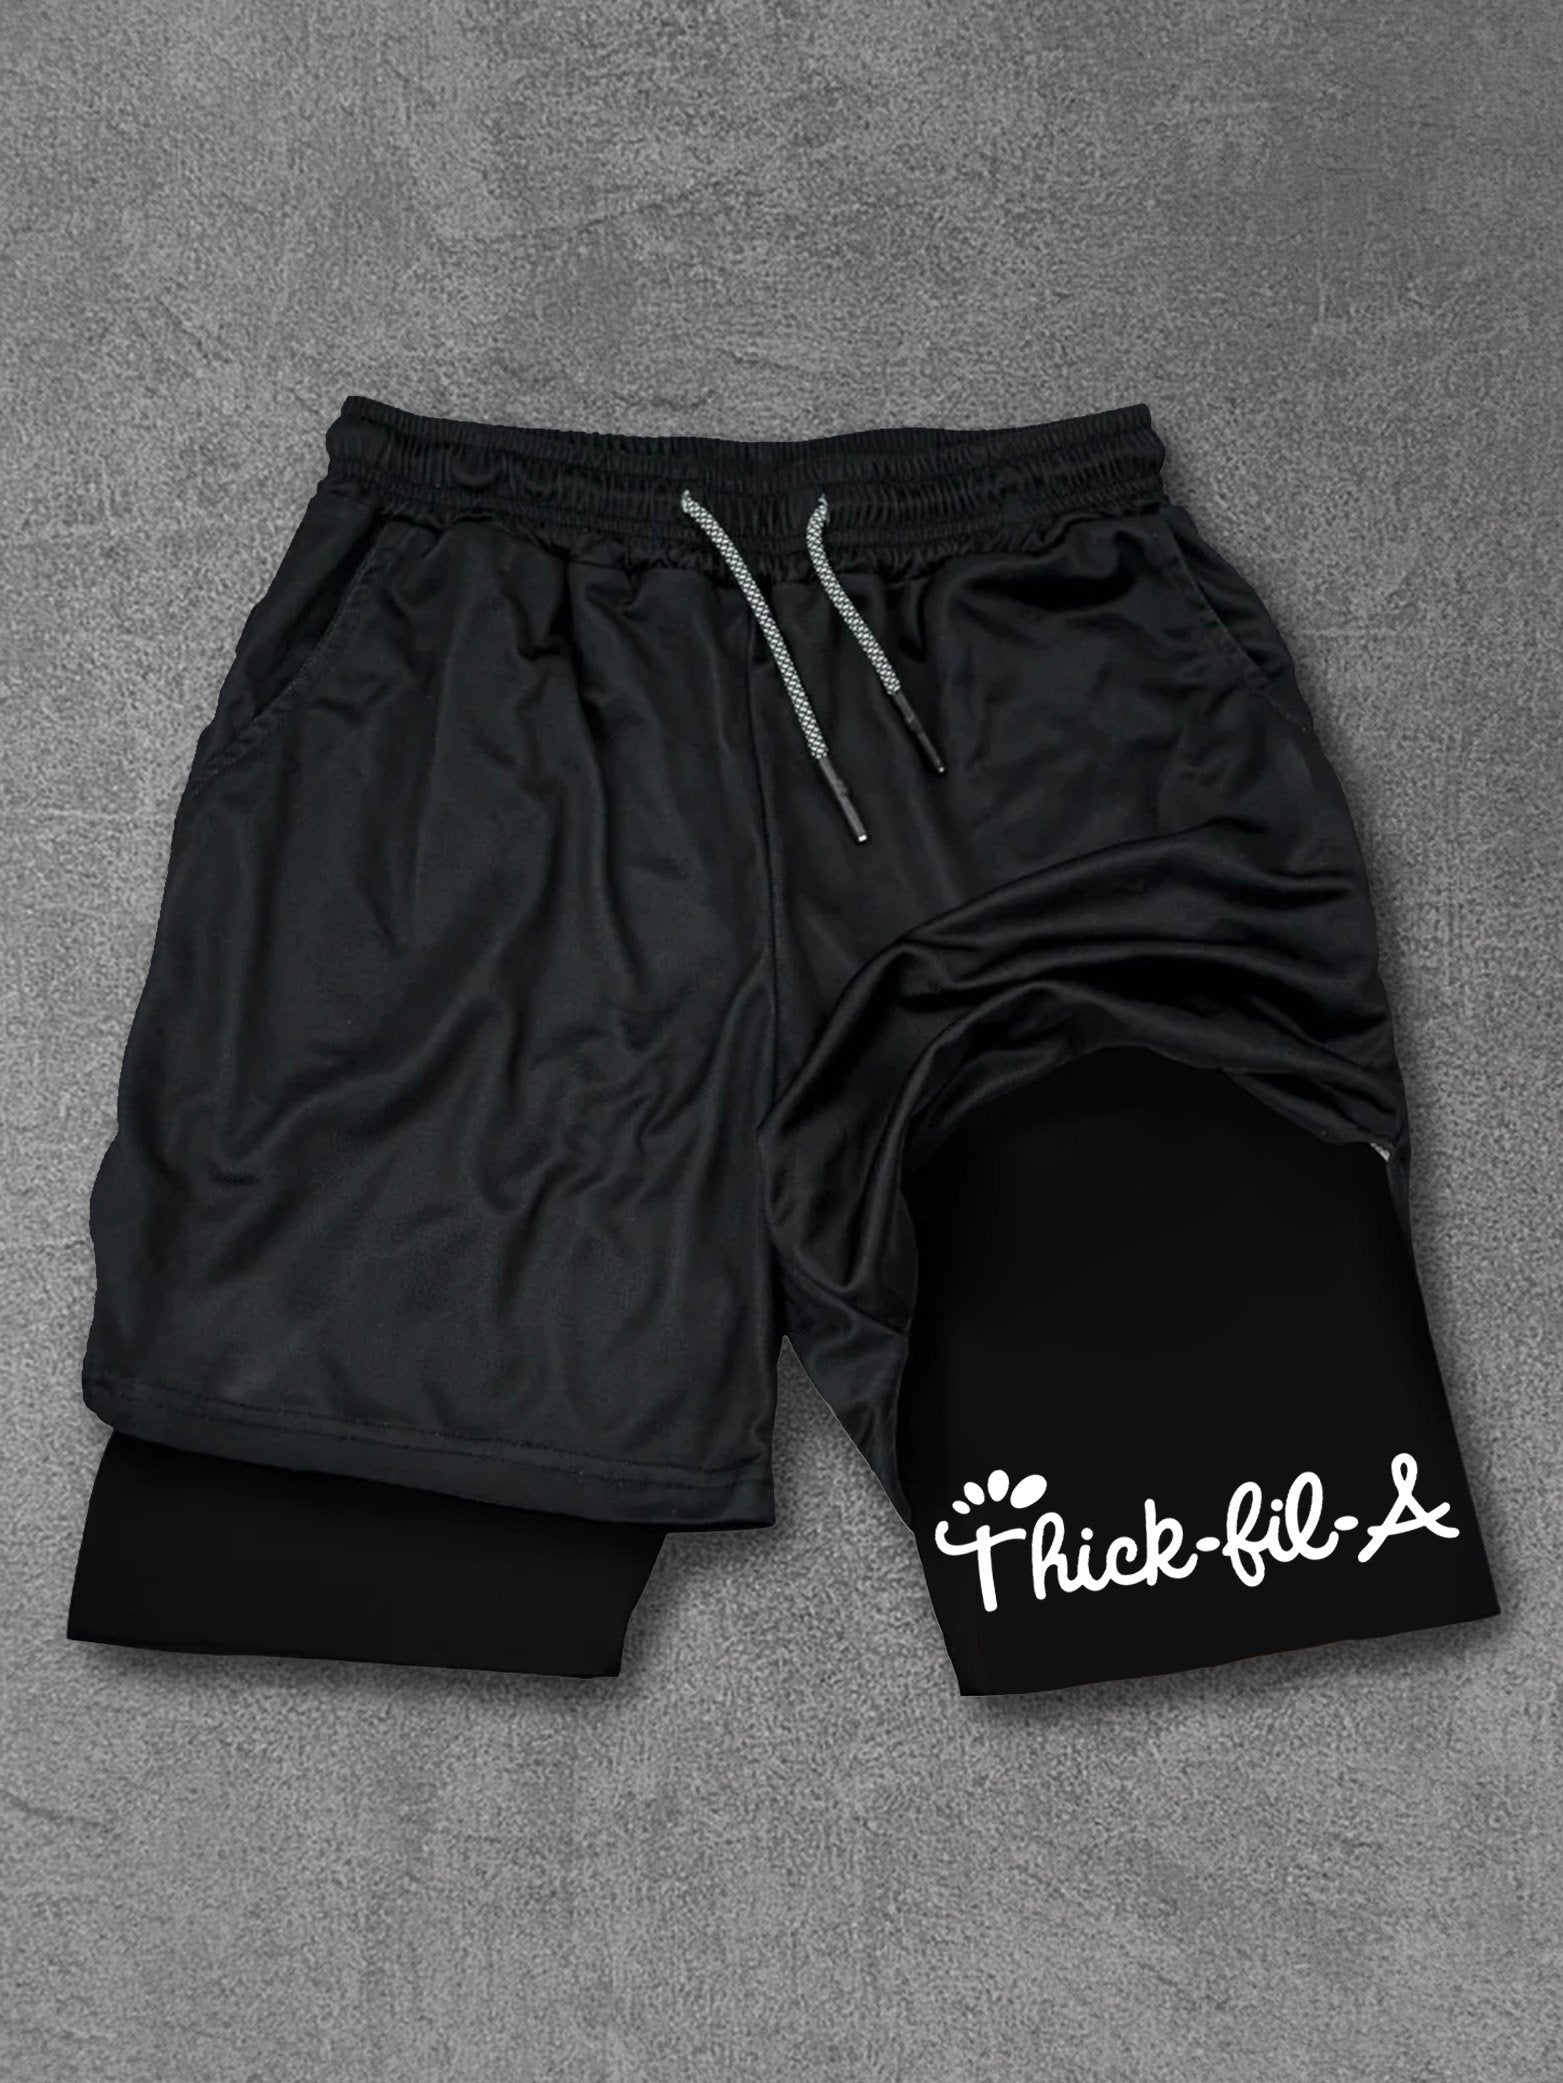 thick-fil-a Performance Training Shorts